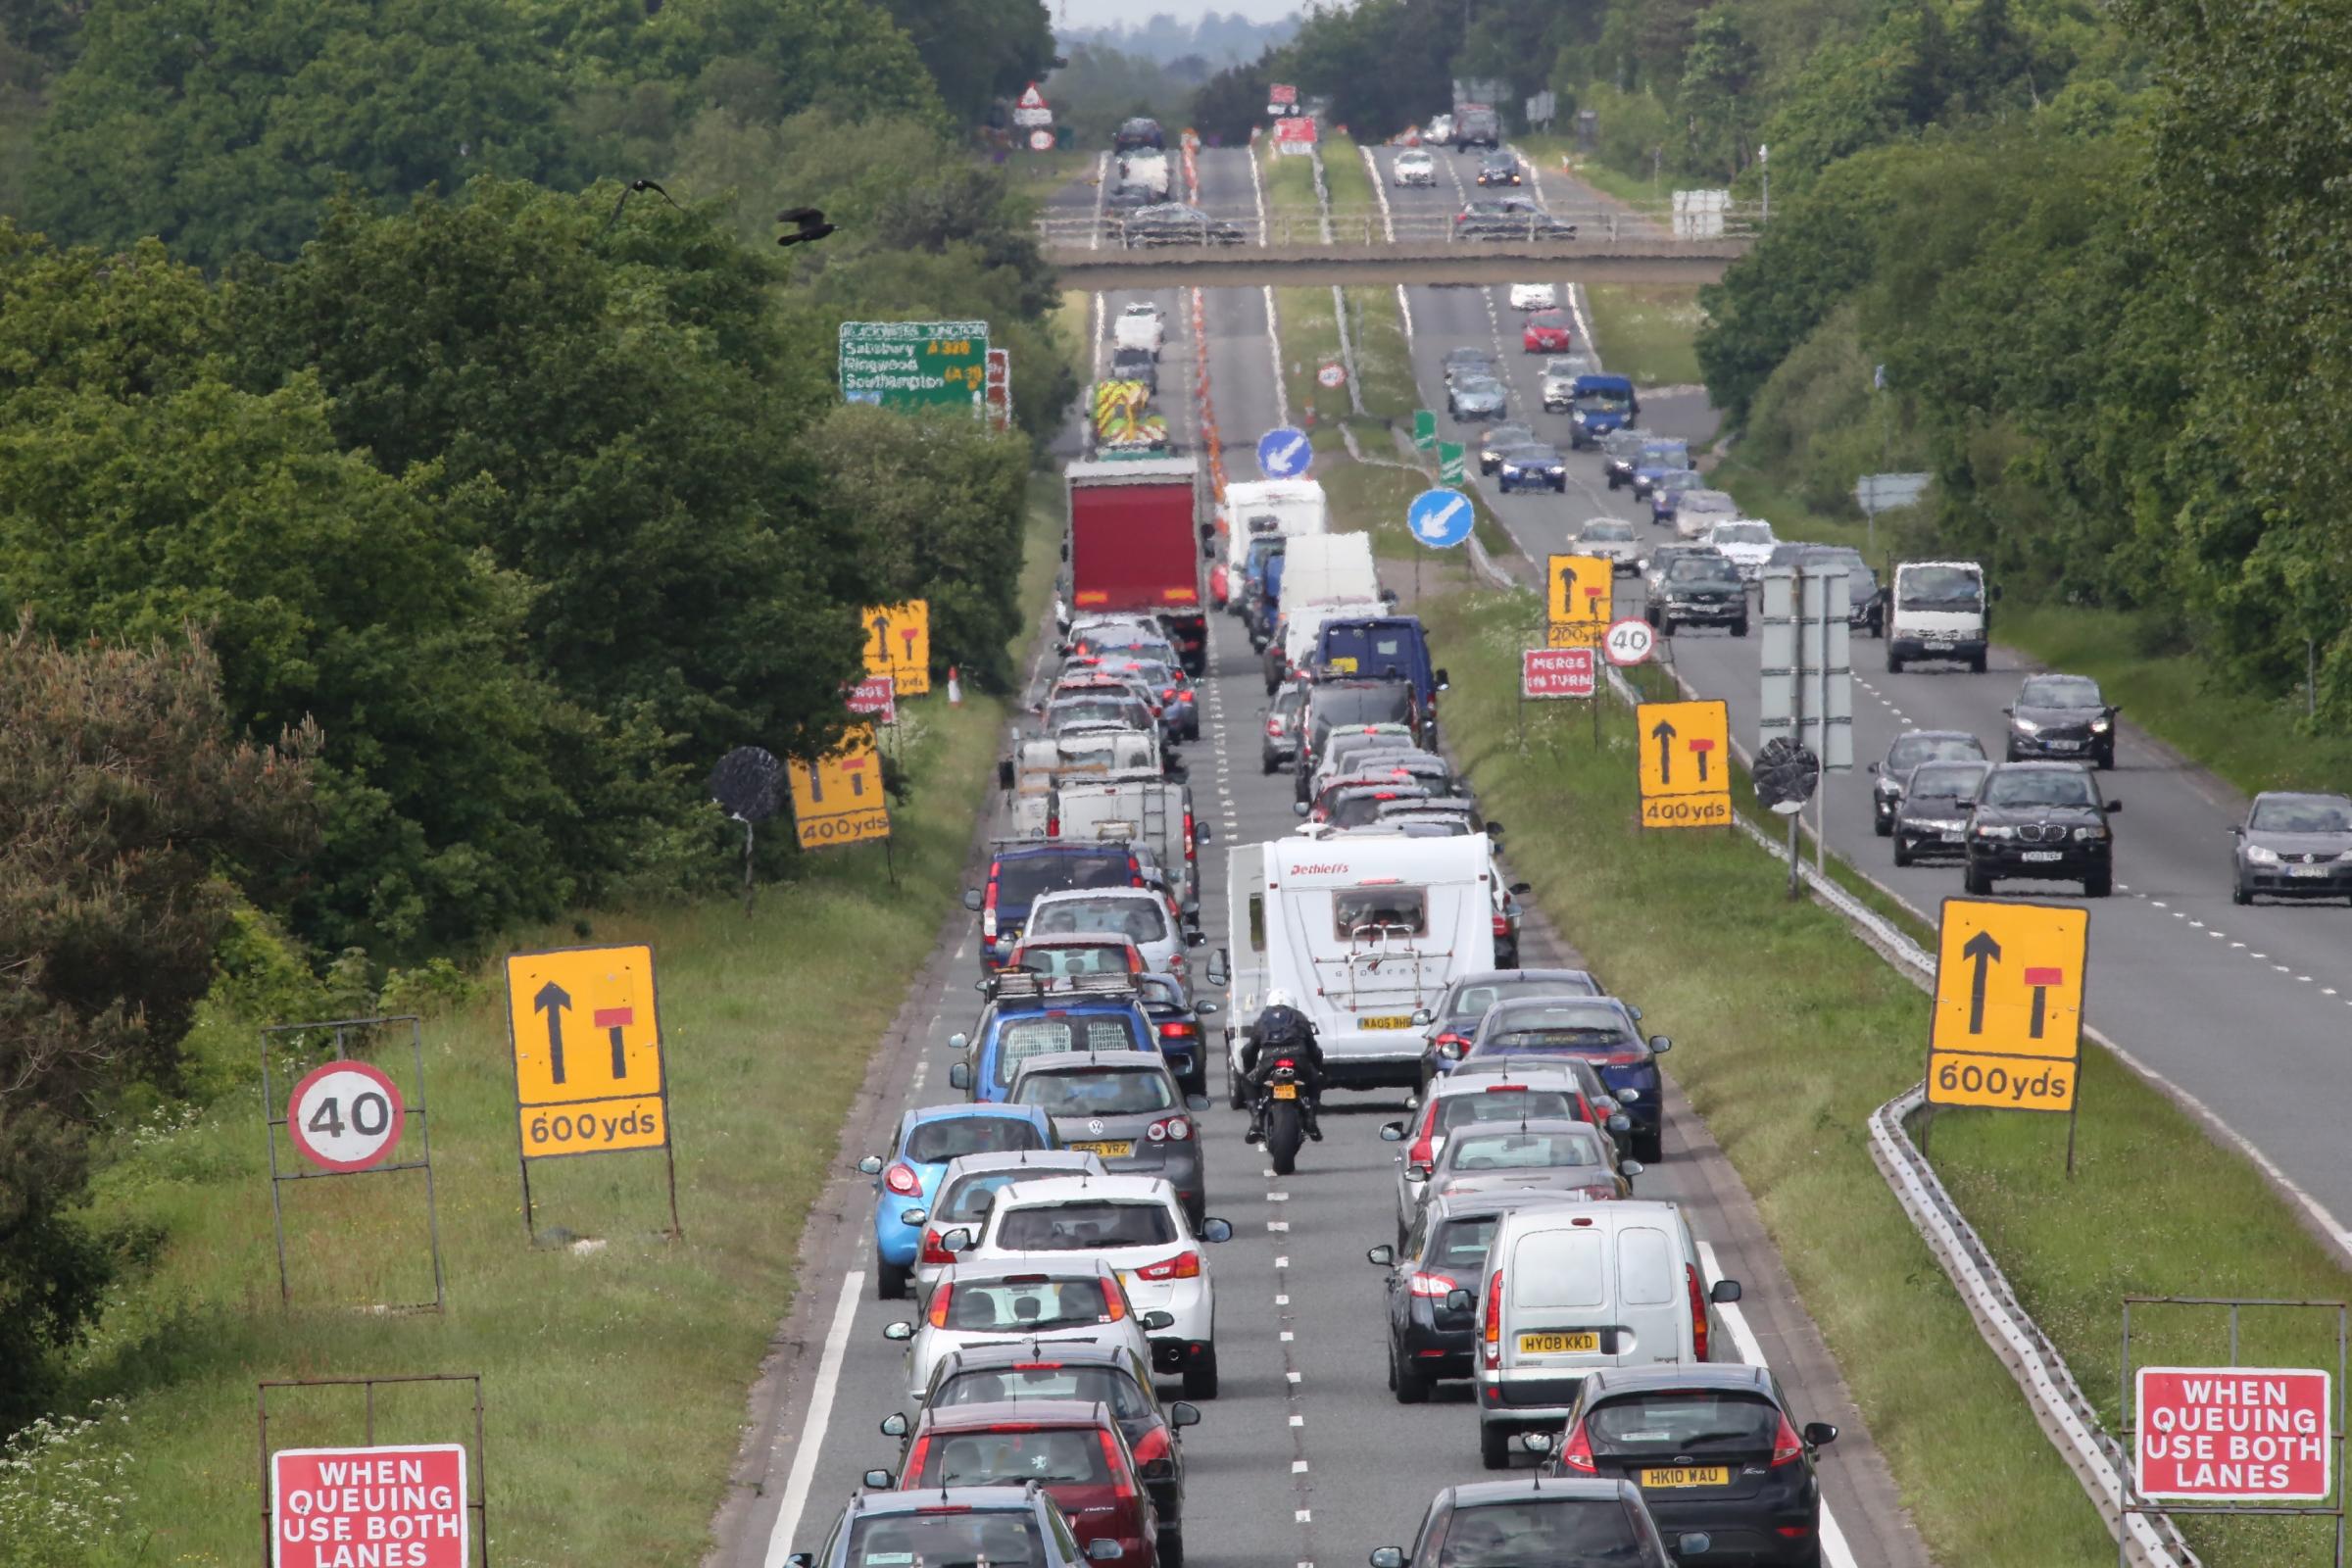 A338 Spur Road and A35 Upton Bypass down to one lane as weeks of roadworks start today